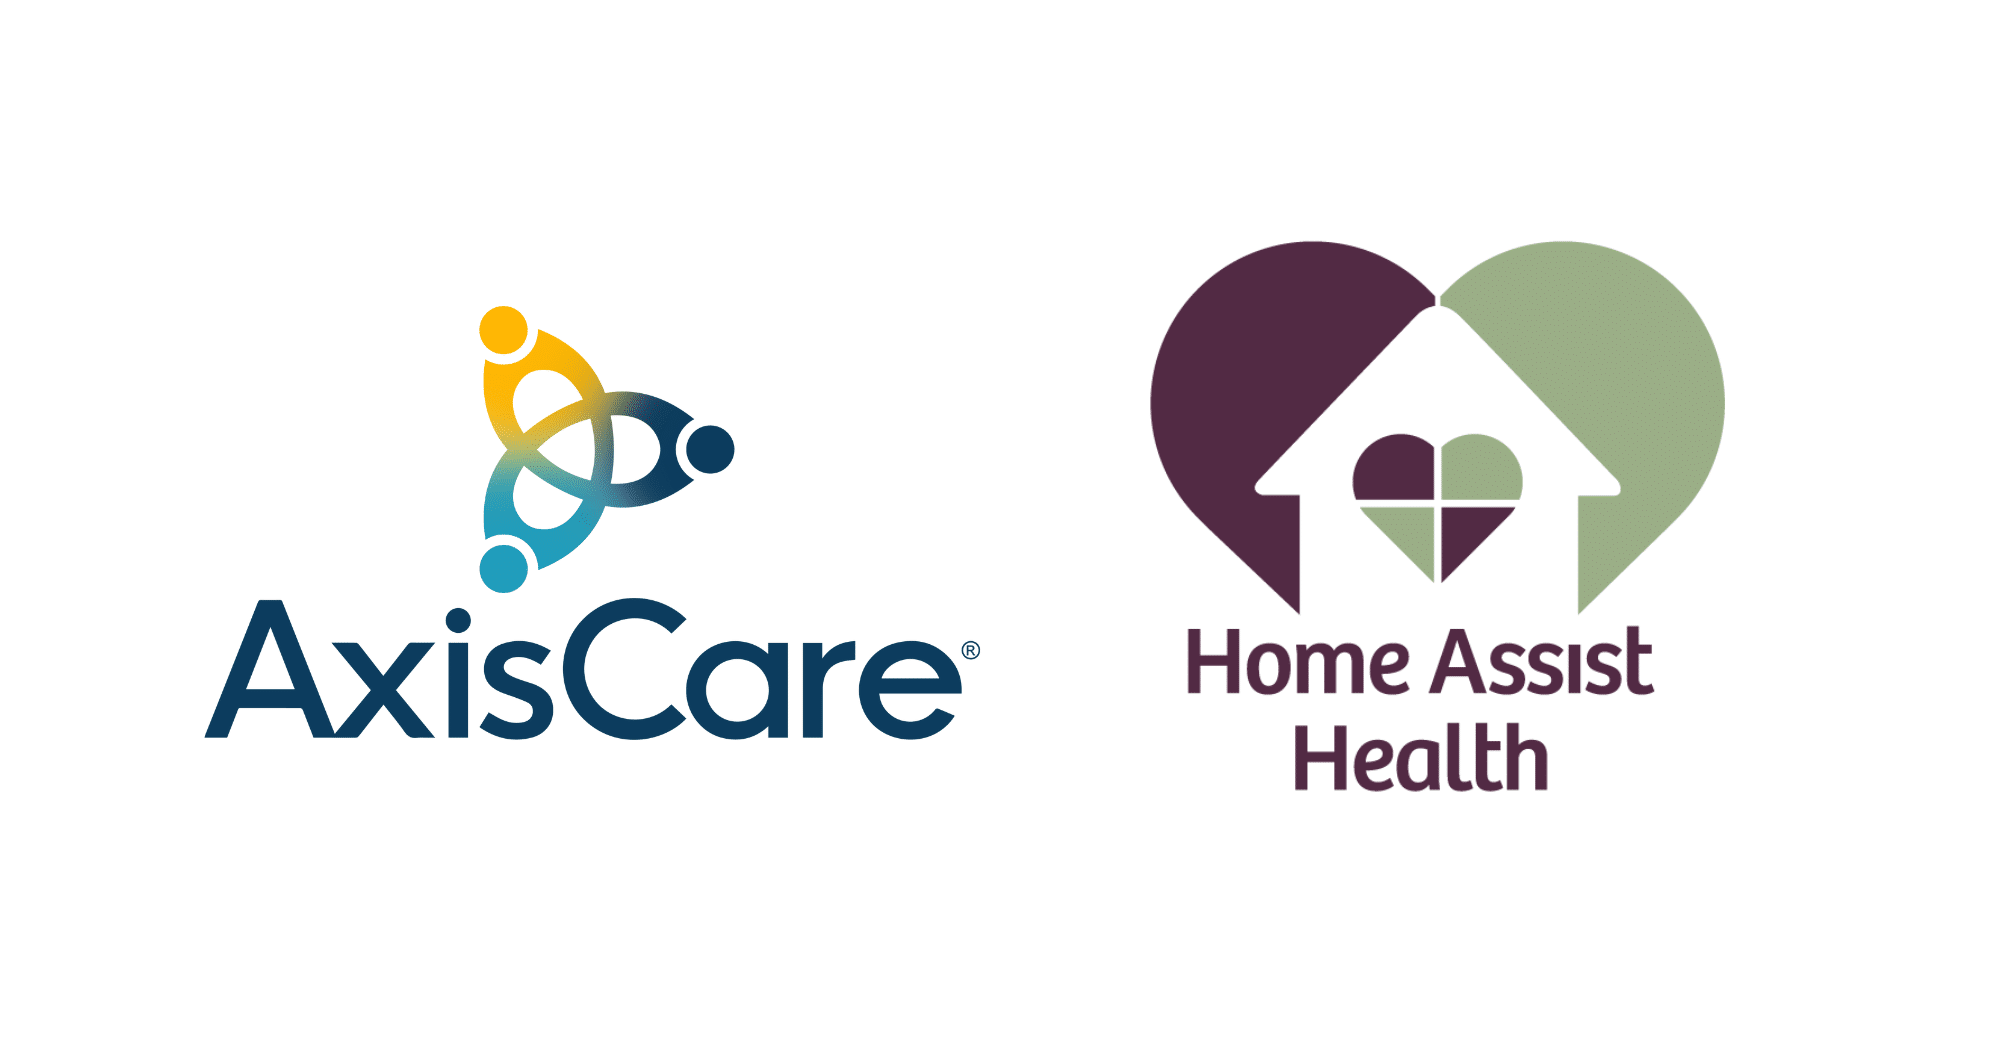 AxisCare and Home Assist Health Logos